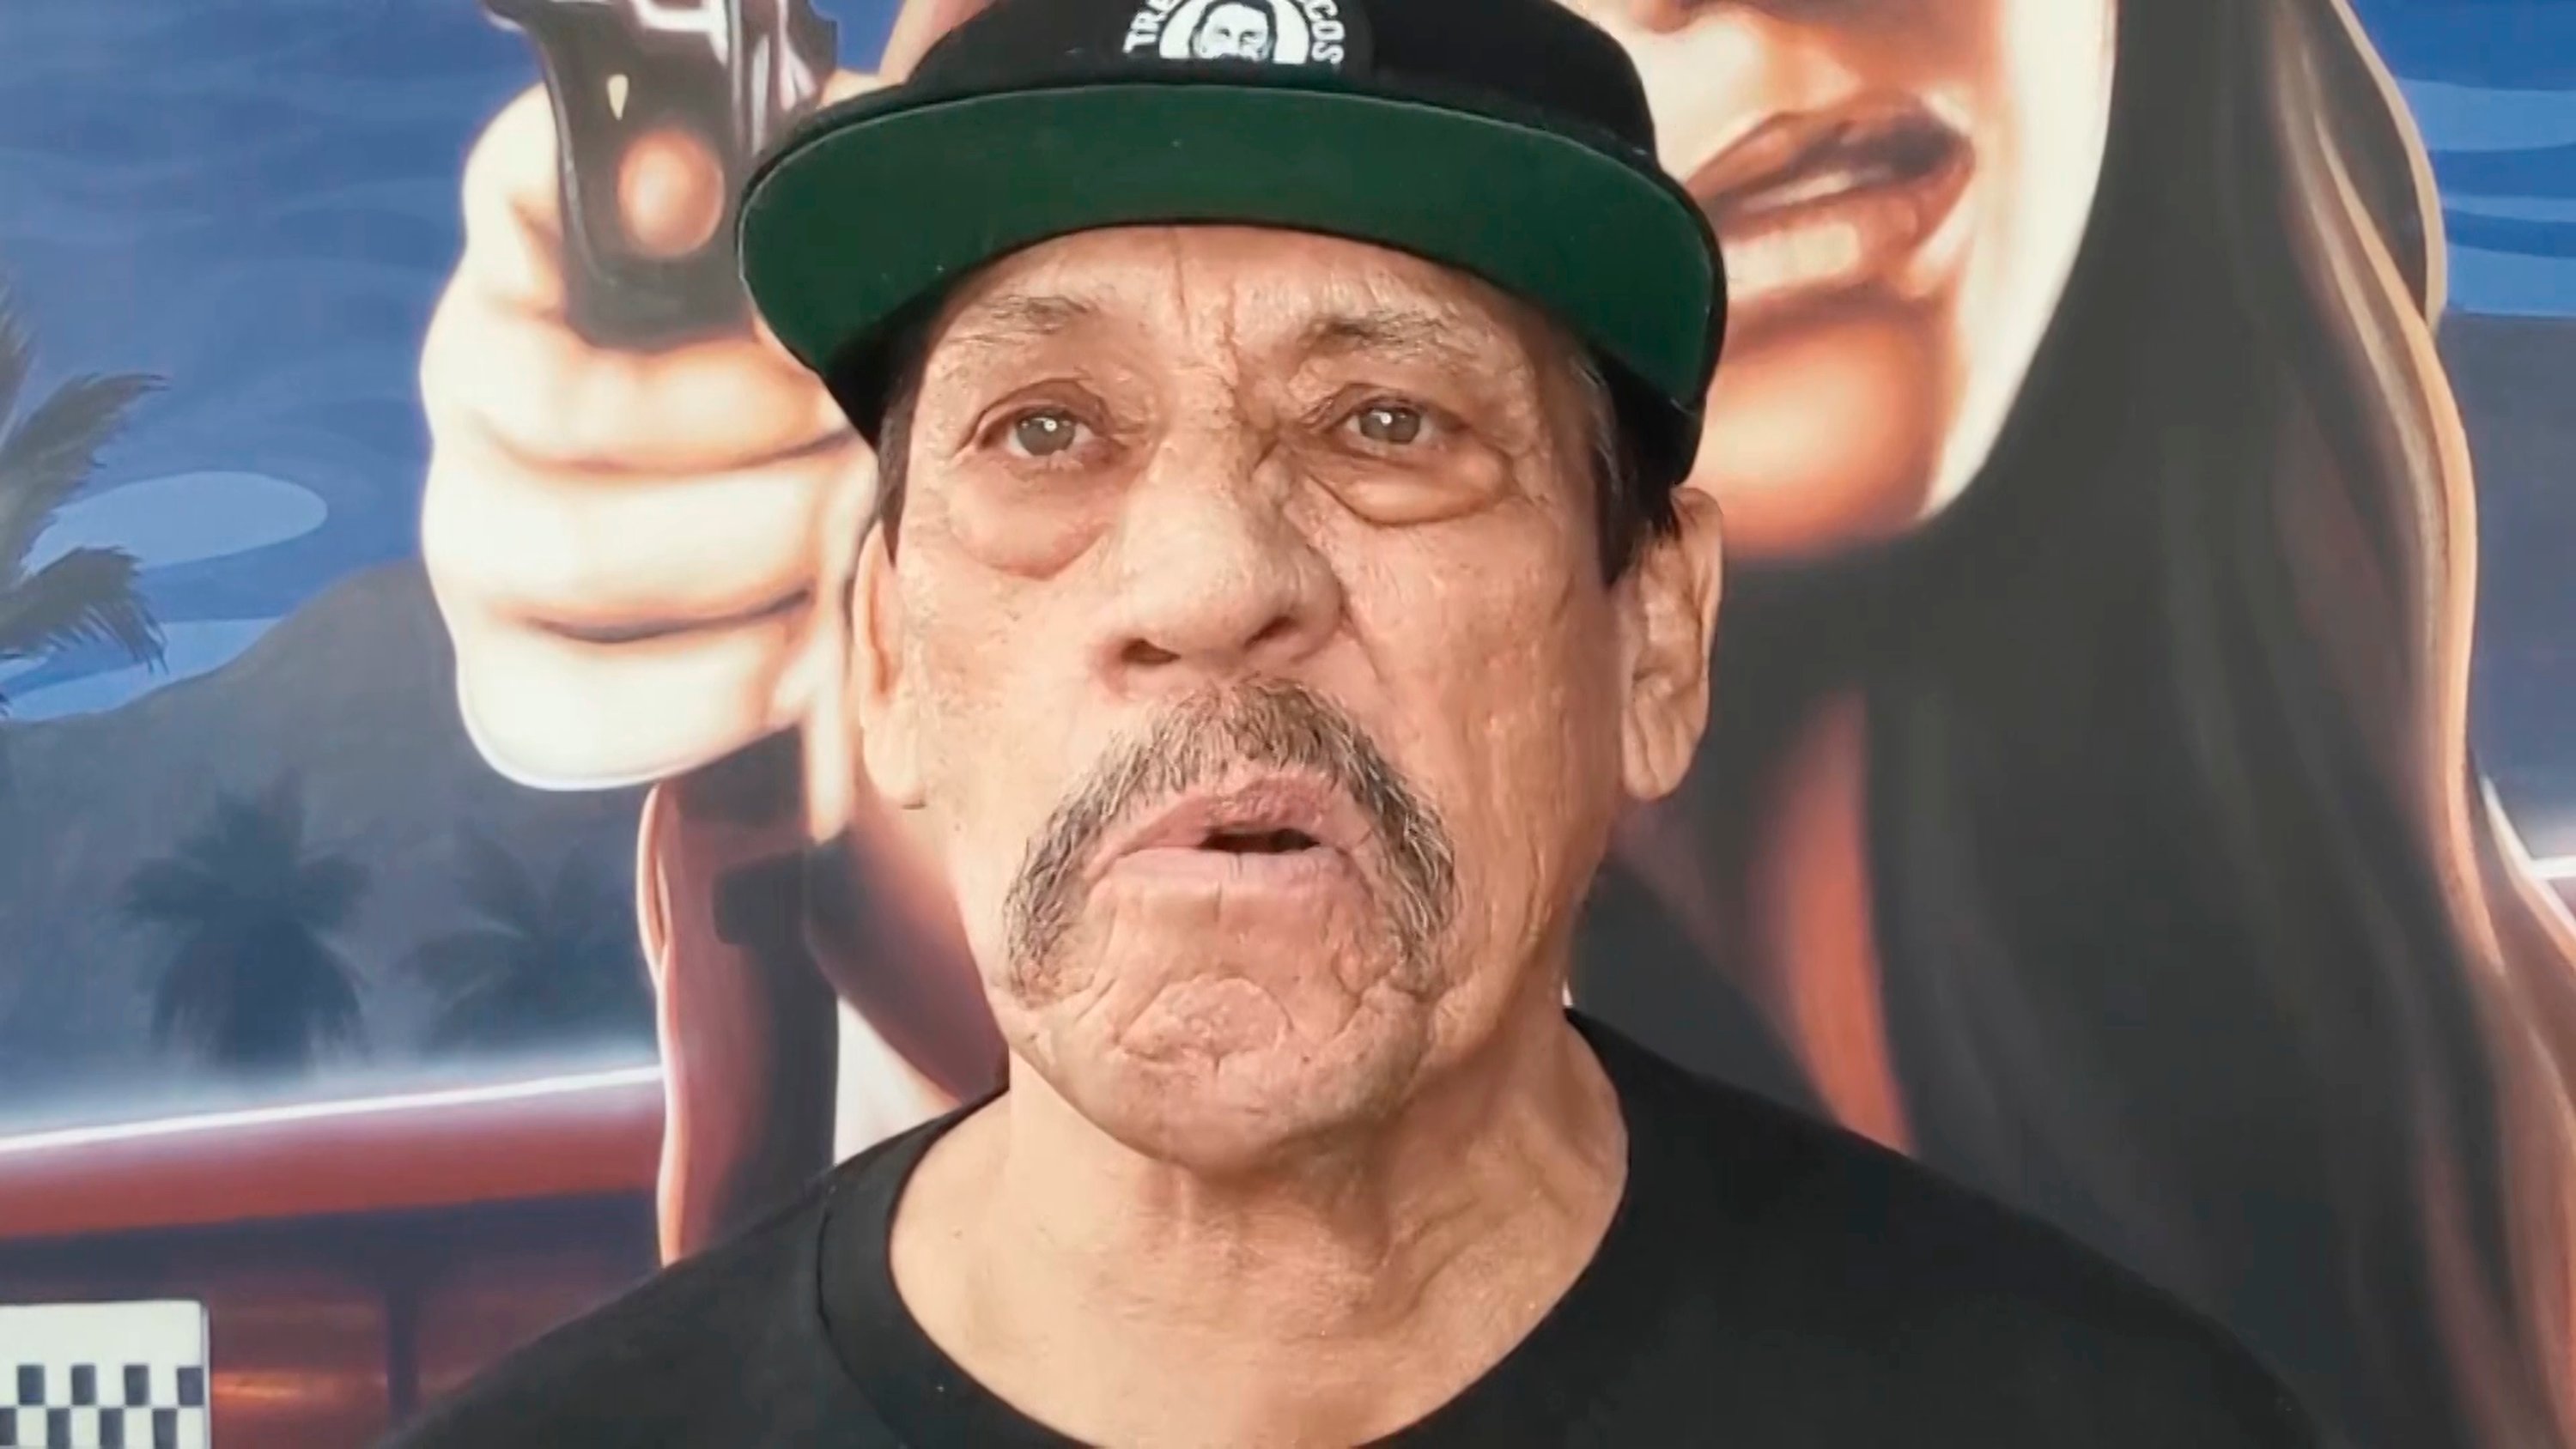 A close-up of Danny Trejo in a hat during the May 9, 2020 episode of 'Saturday Night Live'